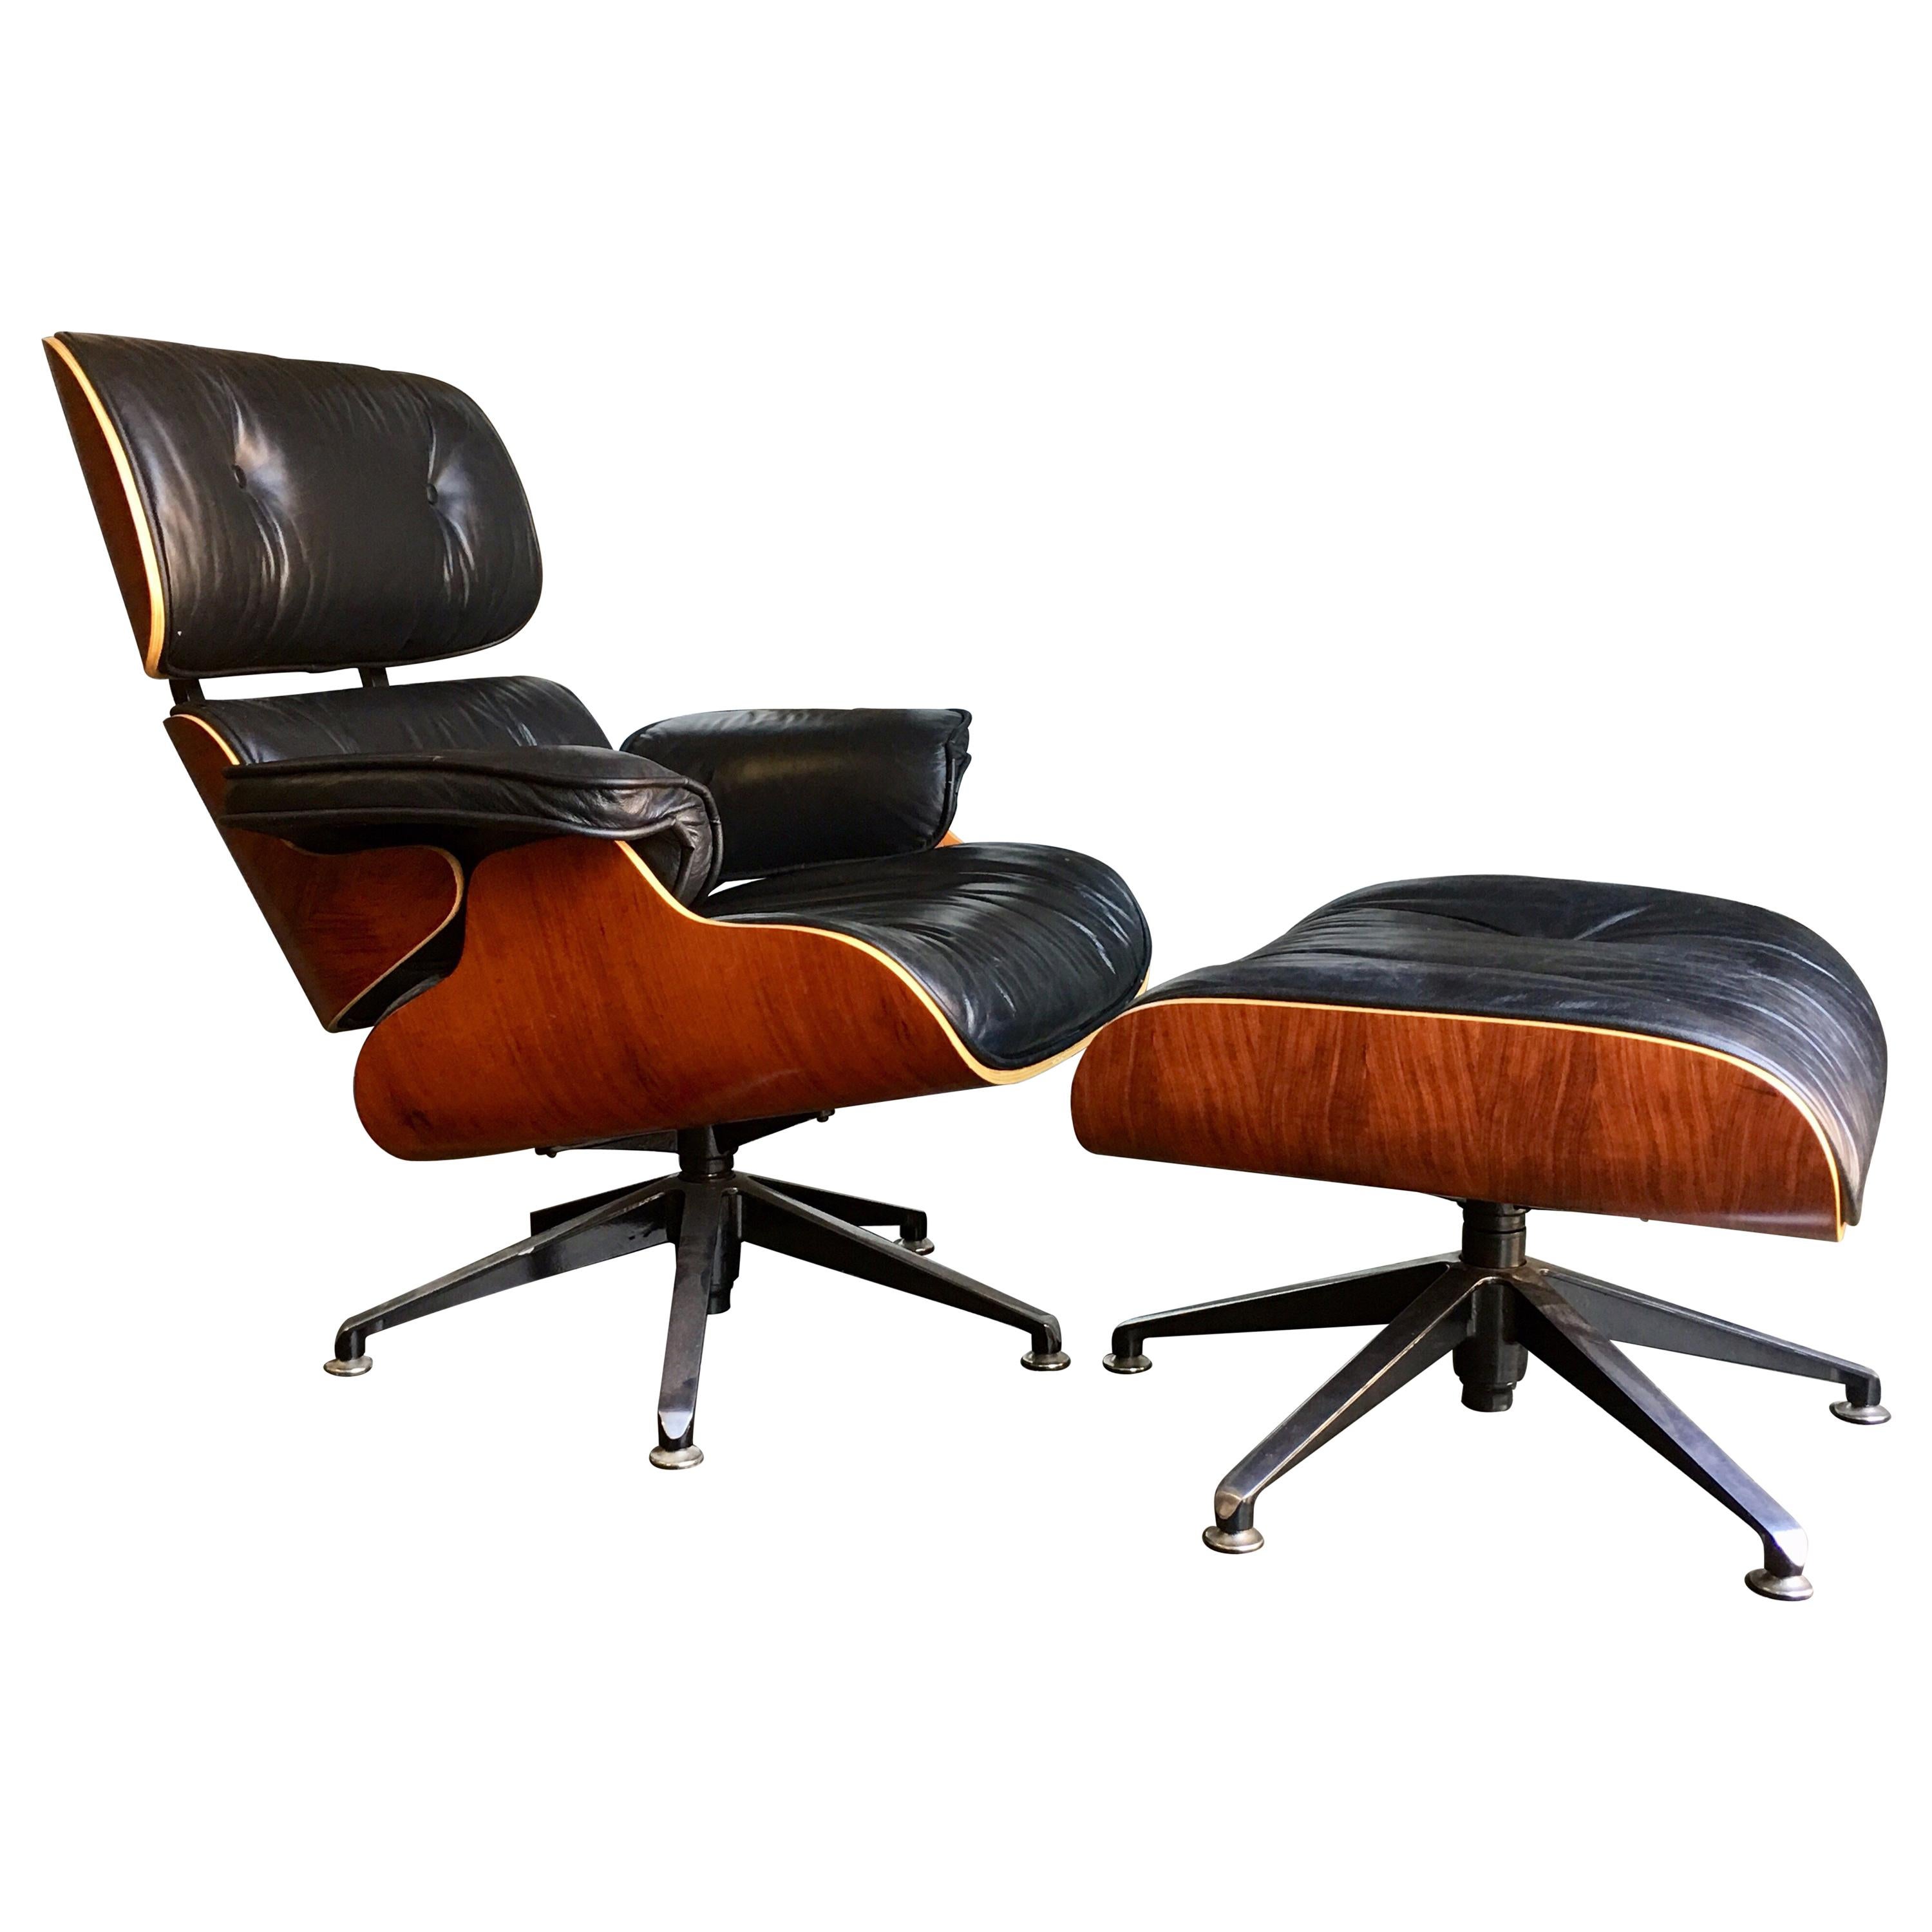 Contemporary black leather and plywood lounger with matching footstool